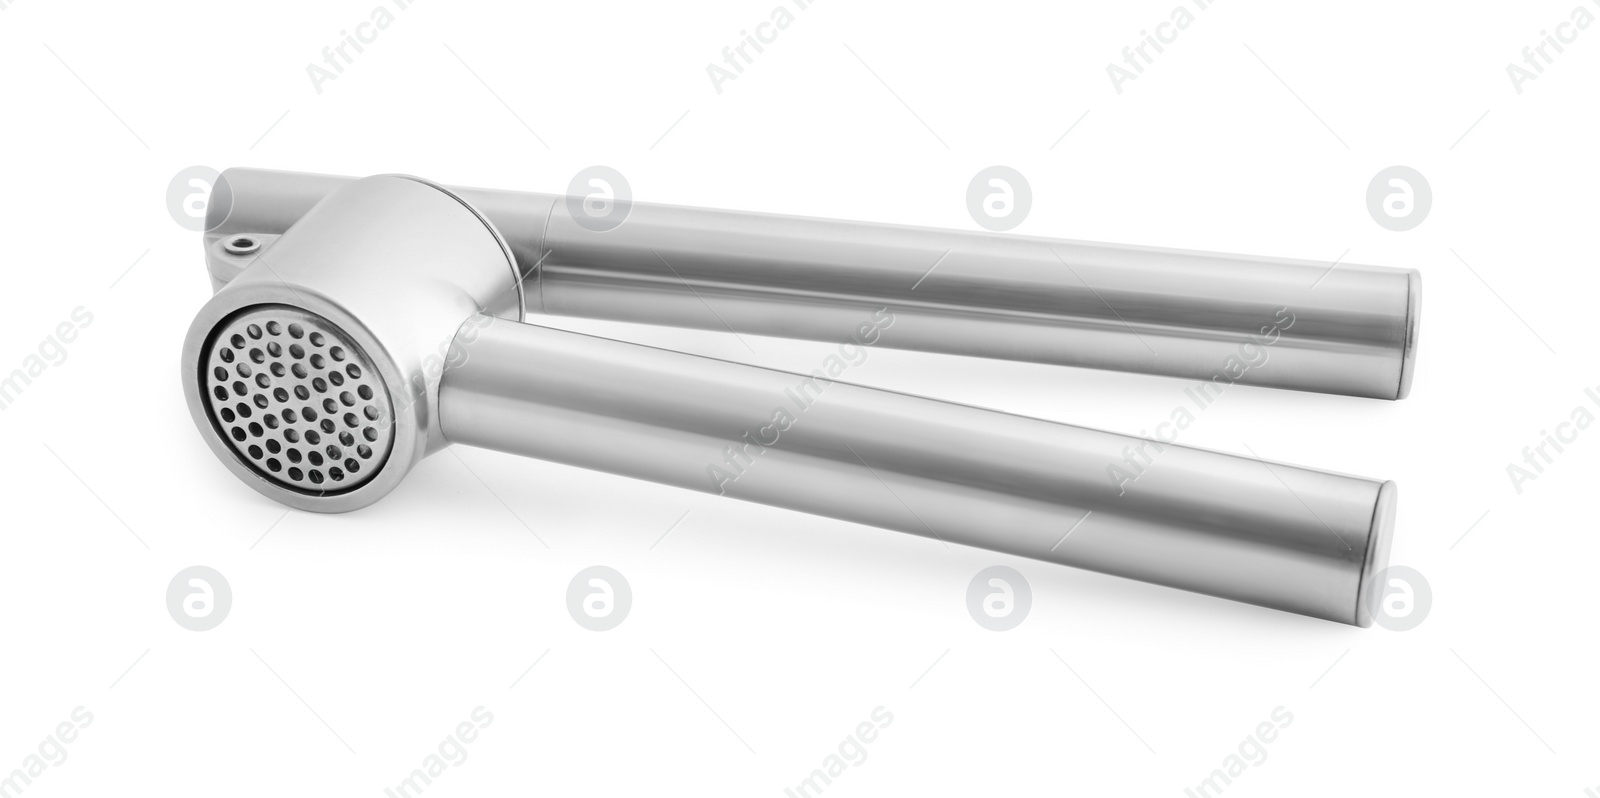 Photo of New metal garlic press isolated on white